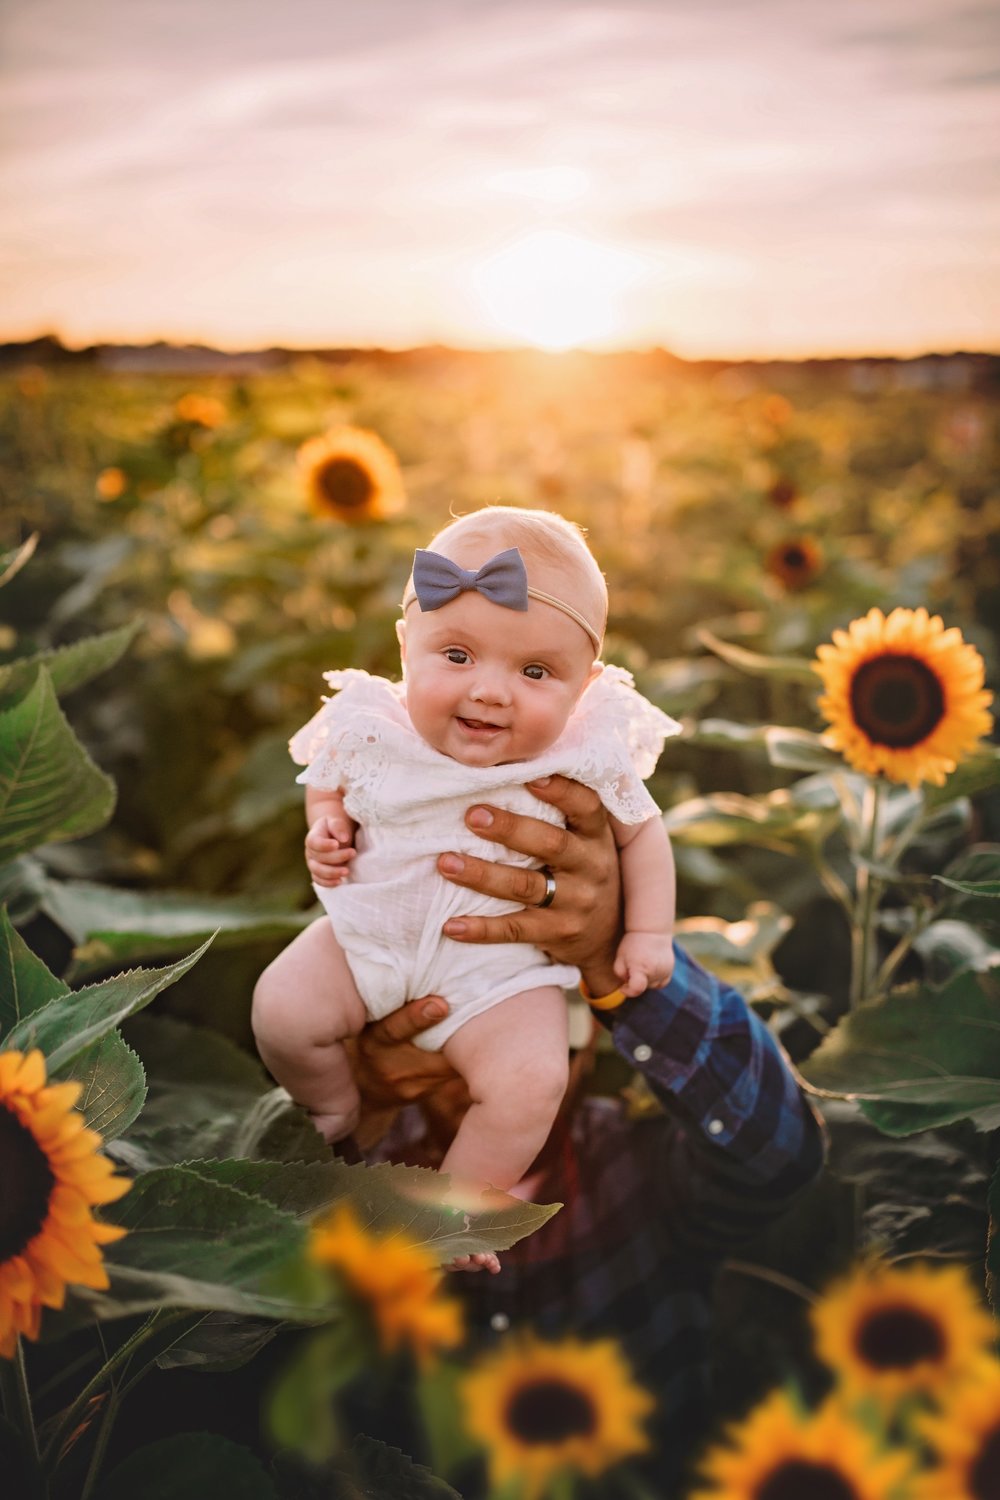 The owners’ baby daughter, Penelope Jane Weiss, also enjoys the fresh flowers.